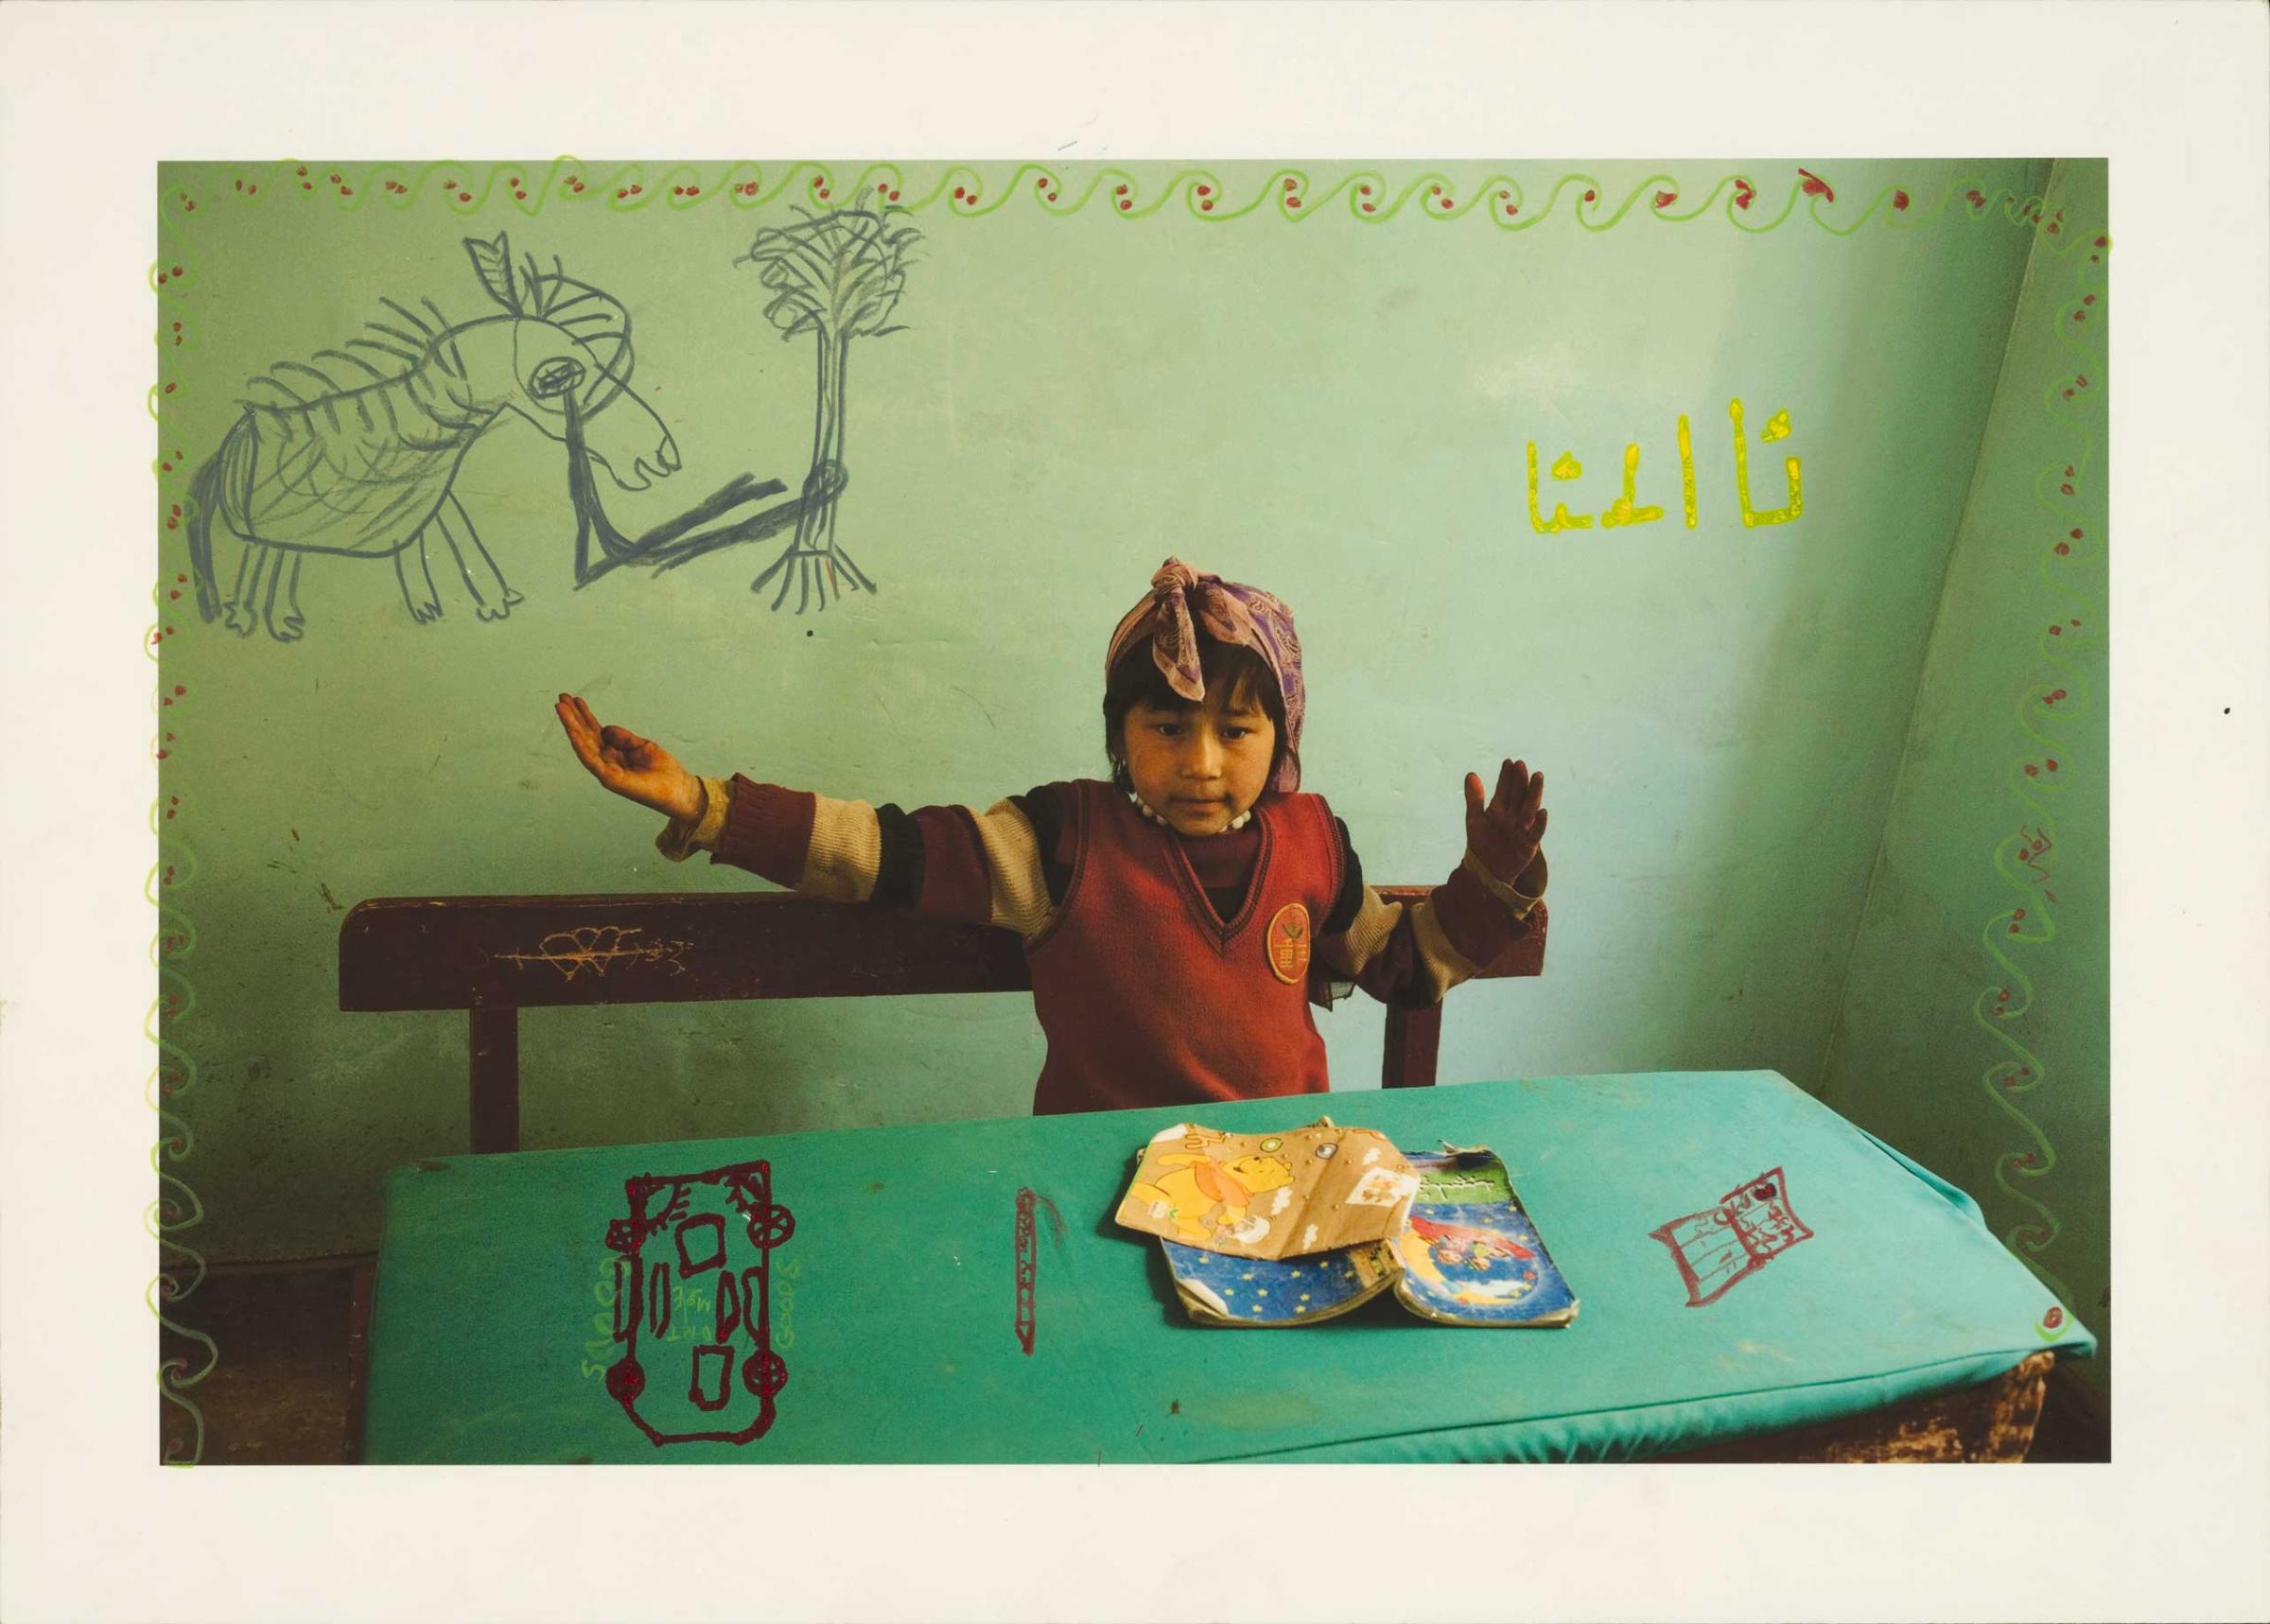 I photographed Guliman learning the Uyghur alphabet at school and returned several years later with this print. She wrote the four versions of the Uyghur letter A on the wall behind her. Her gesture represents the “final A.” 2011